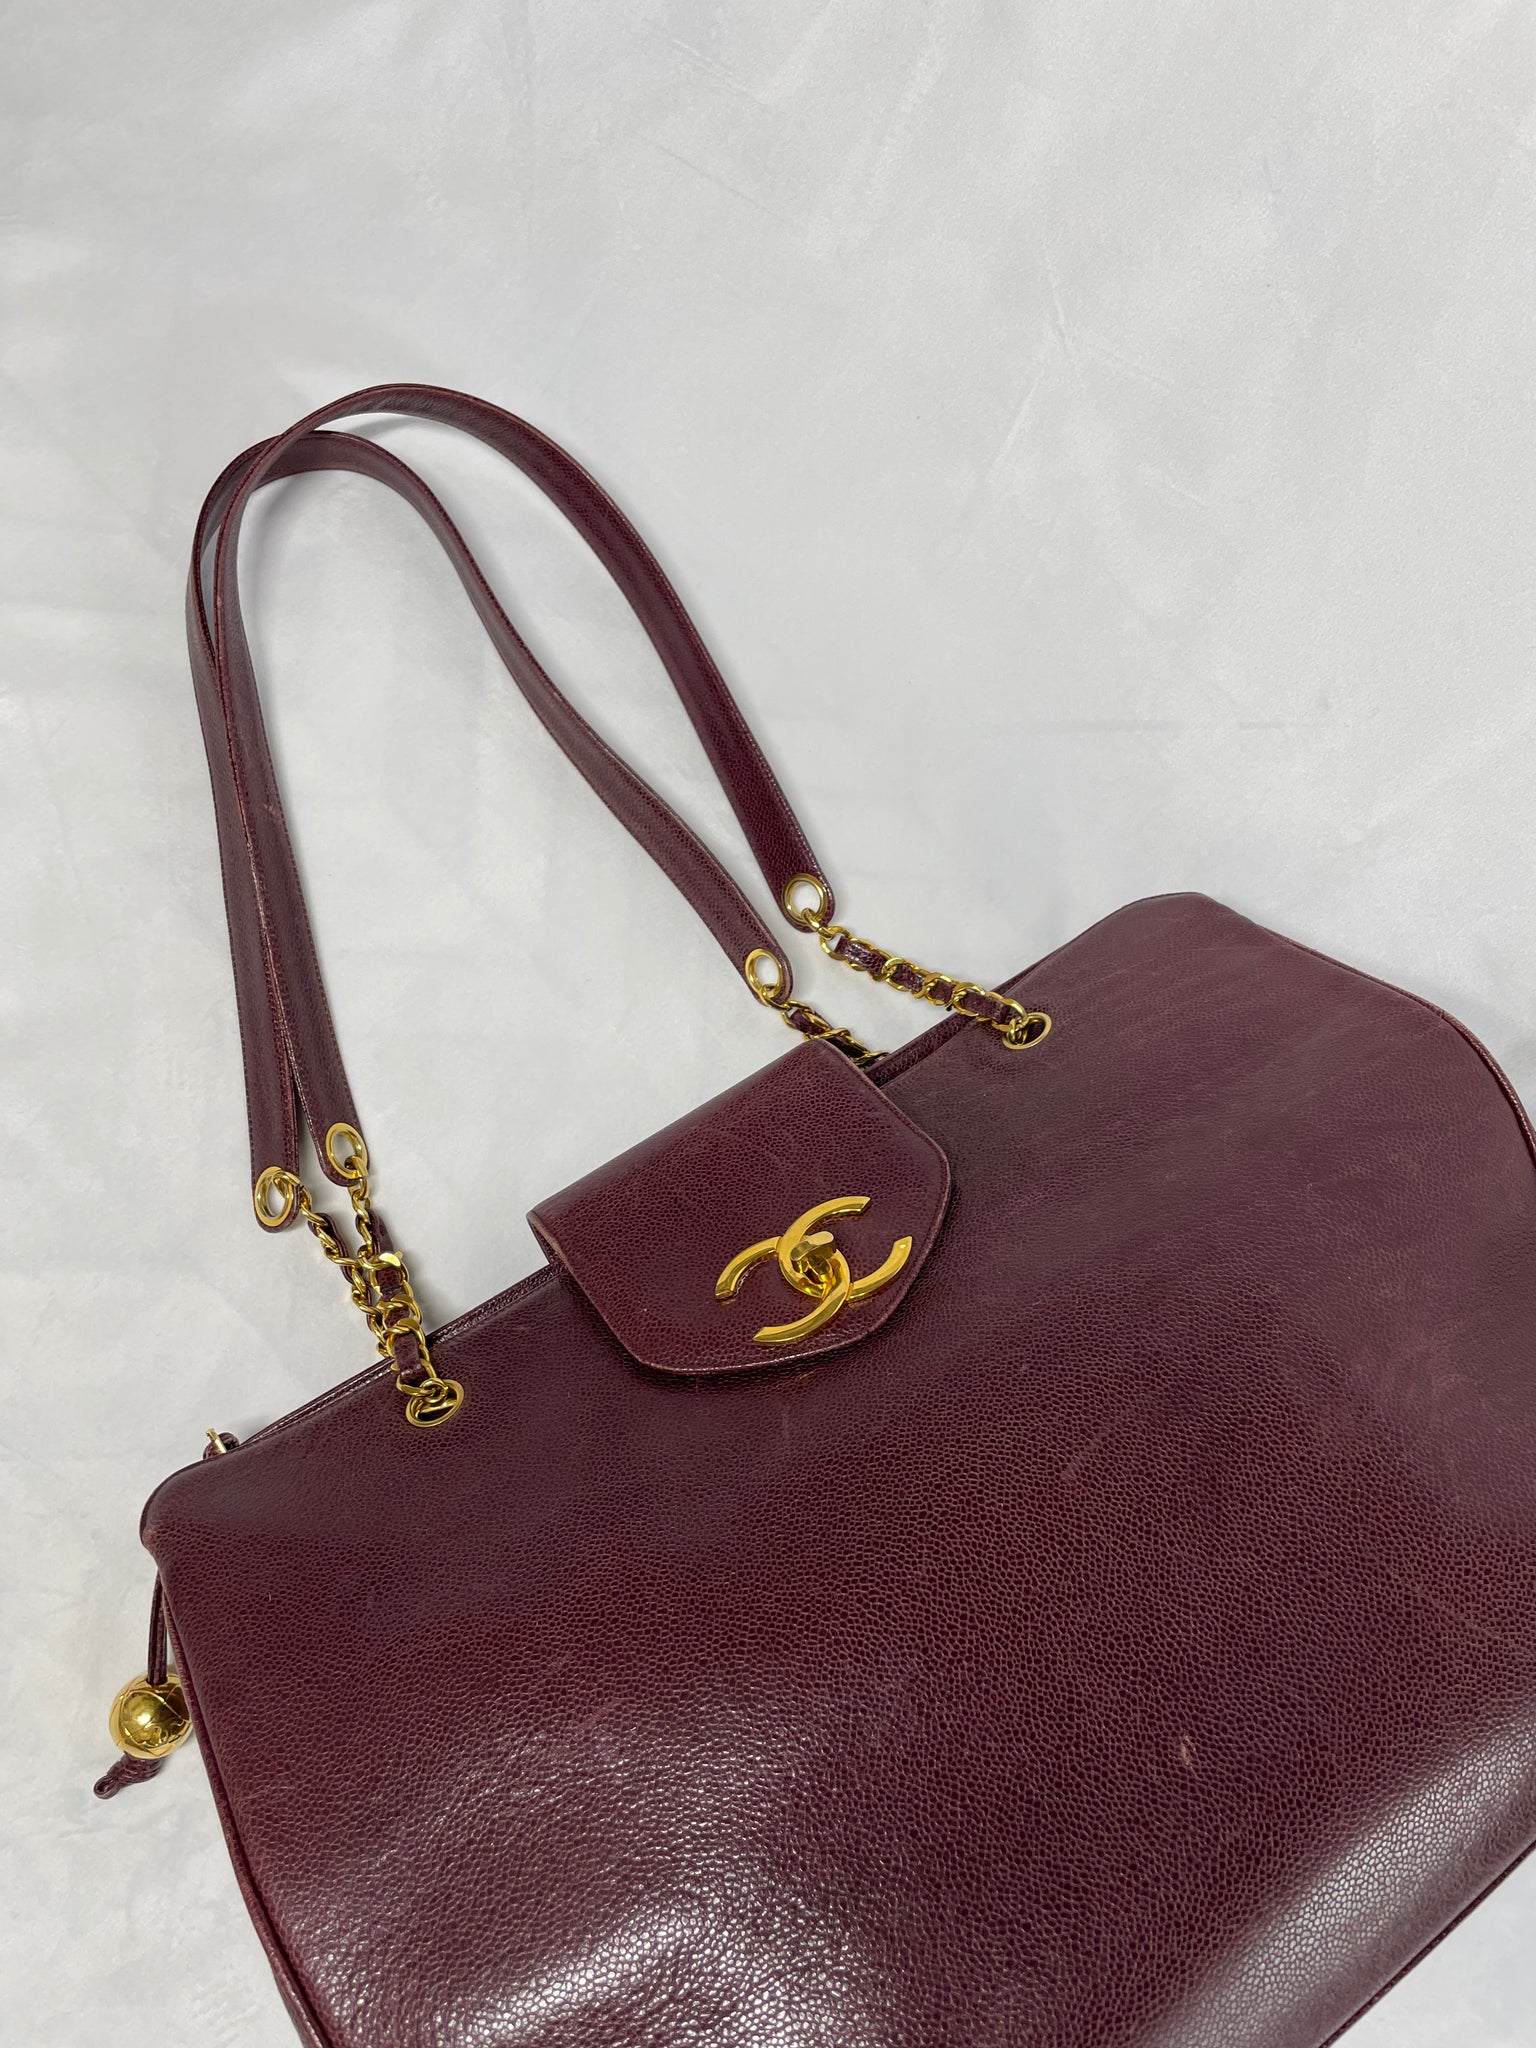 Pre Loved Chanel Vintage Supermodel Tote XL Bag from UniKoncept in Waterloo